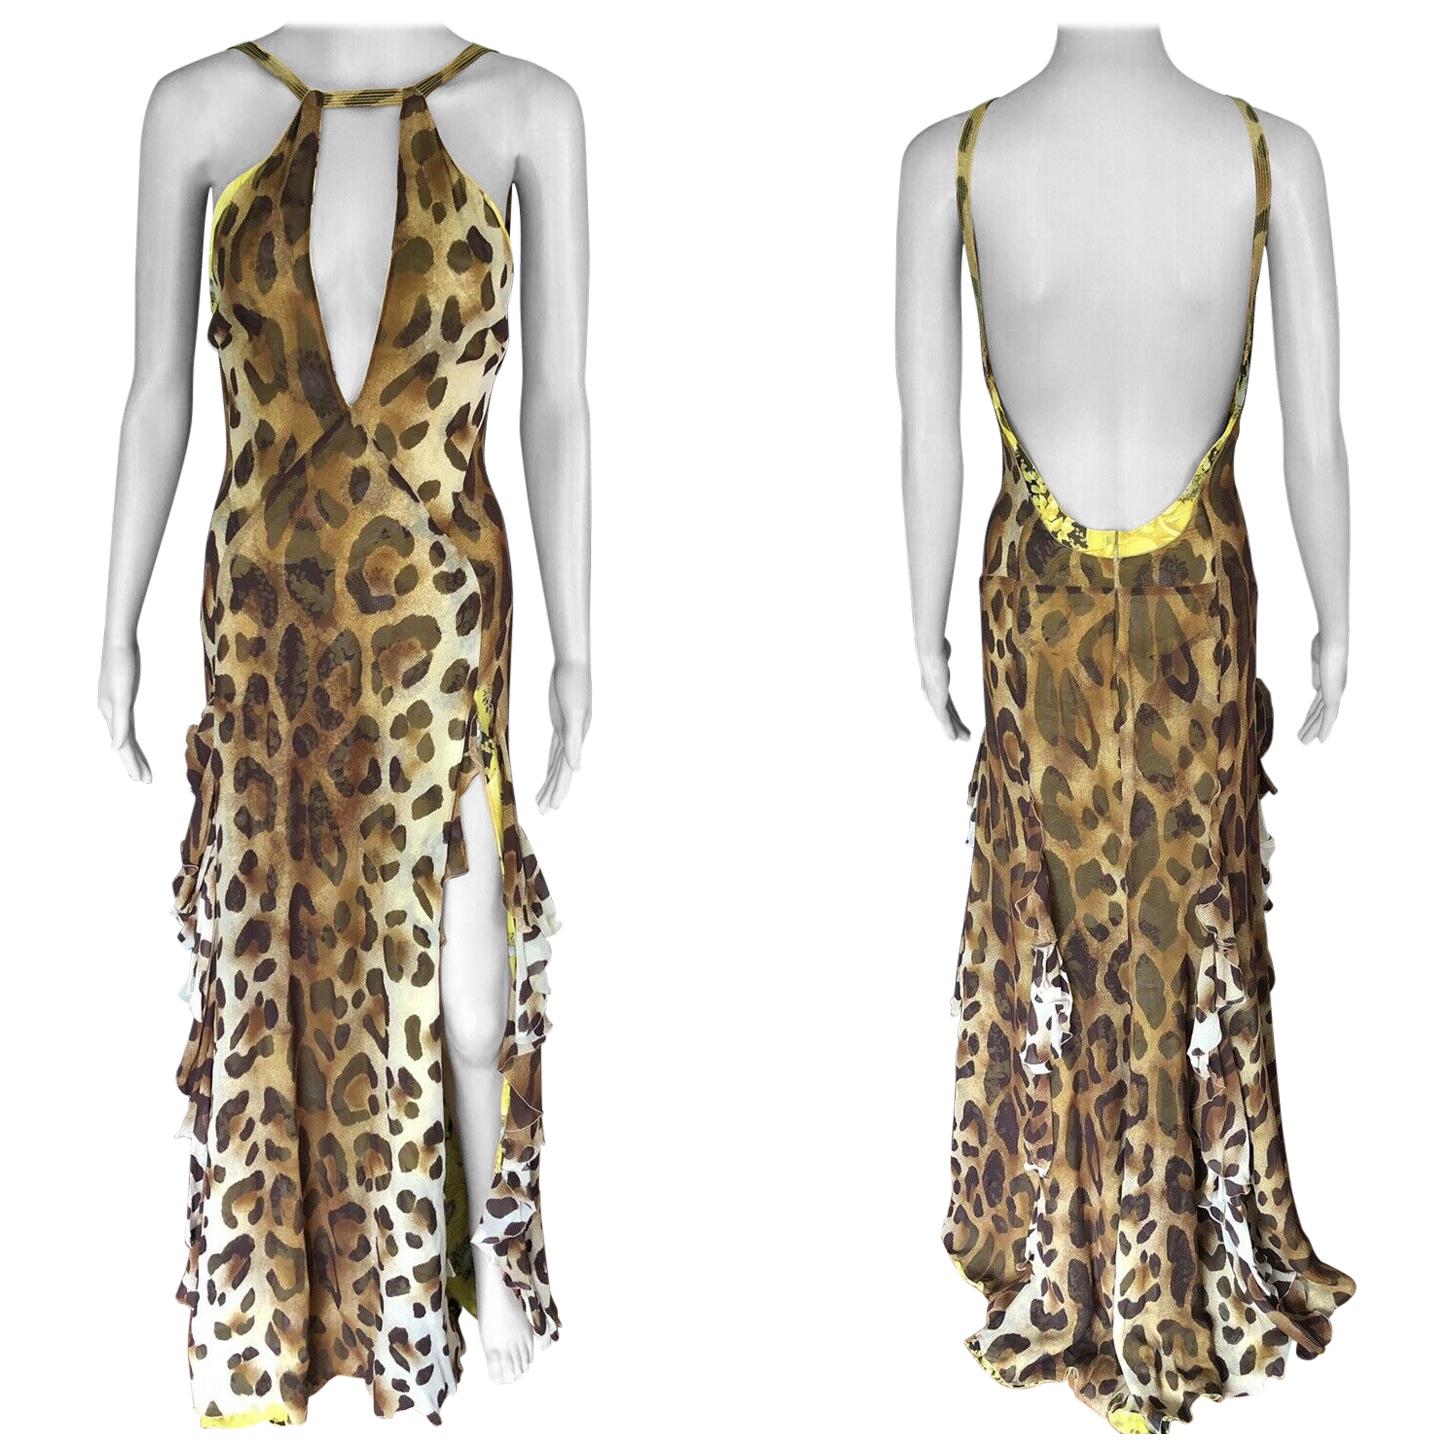 Gianni Versace S/S 2002 Vintage Plunged Backless Dress Gown